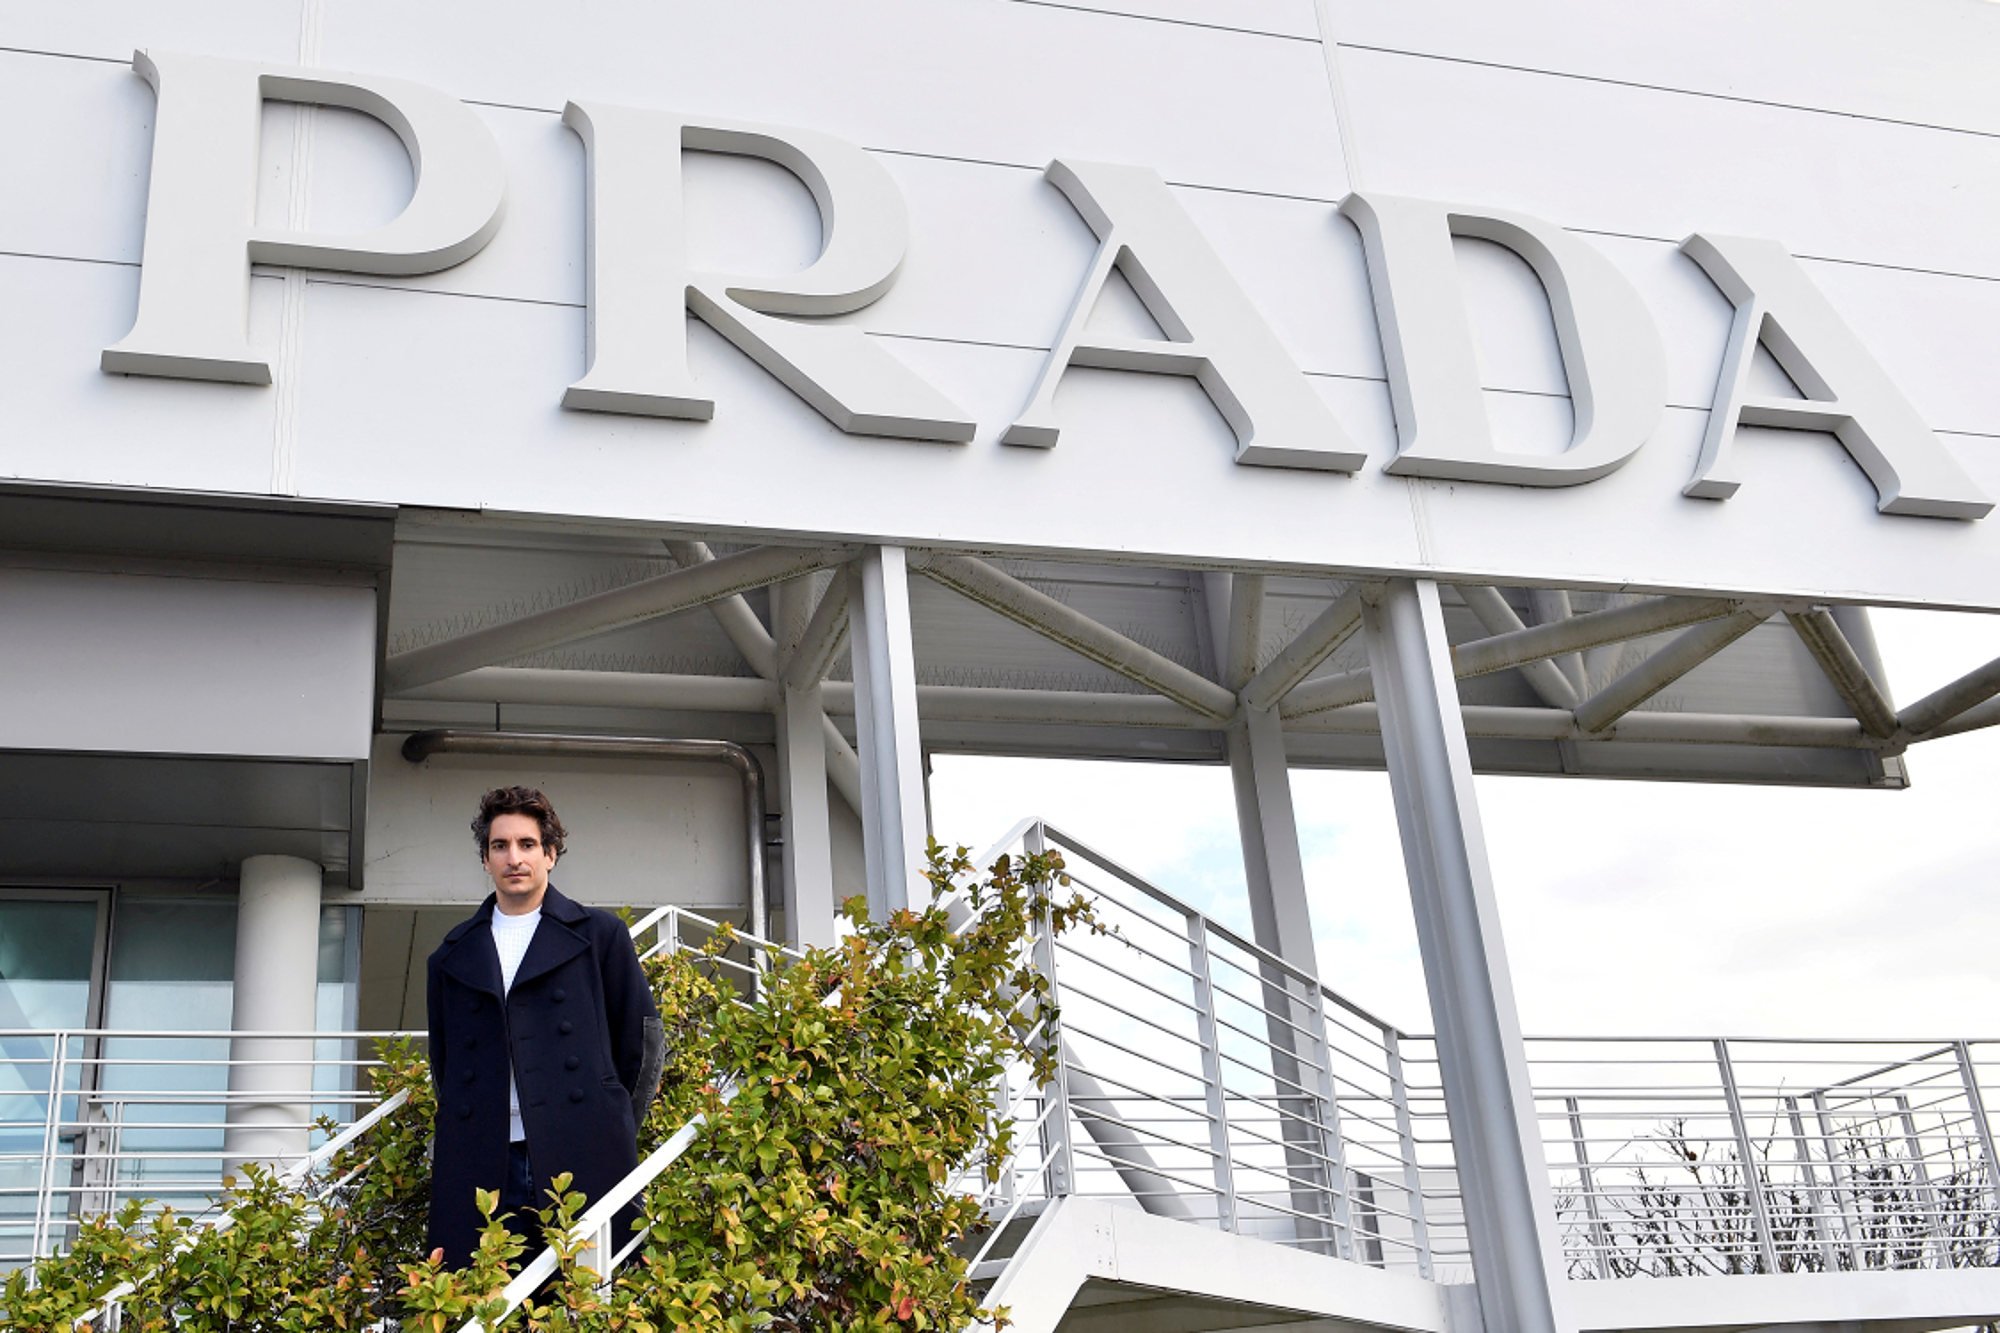 Prada charts line of business succession, tapping new CEO, Retail